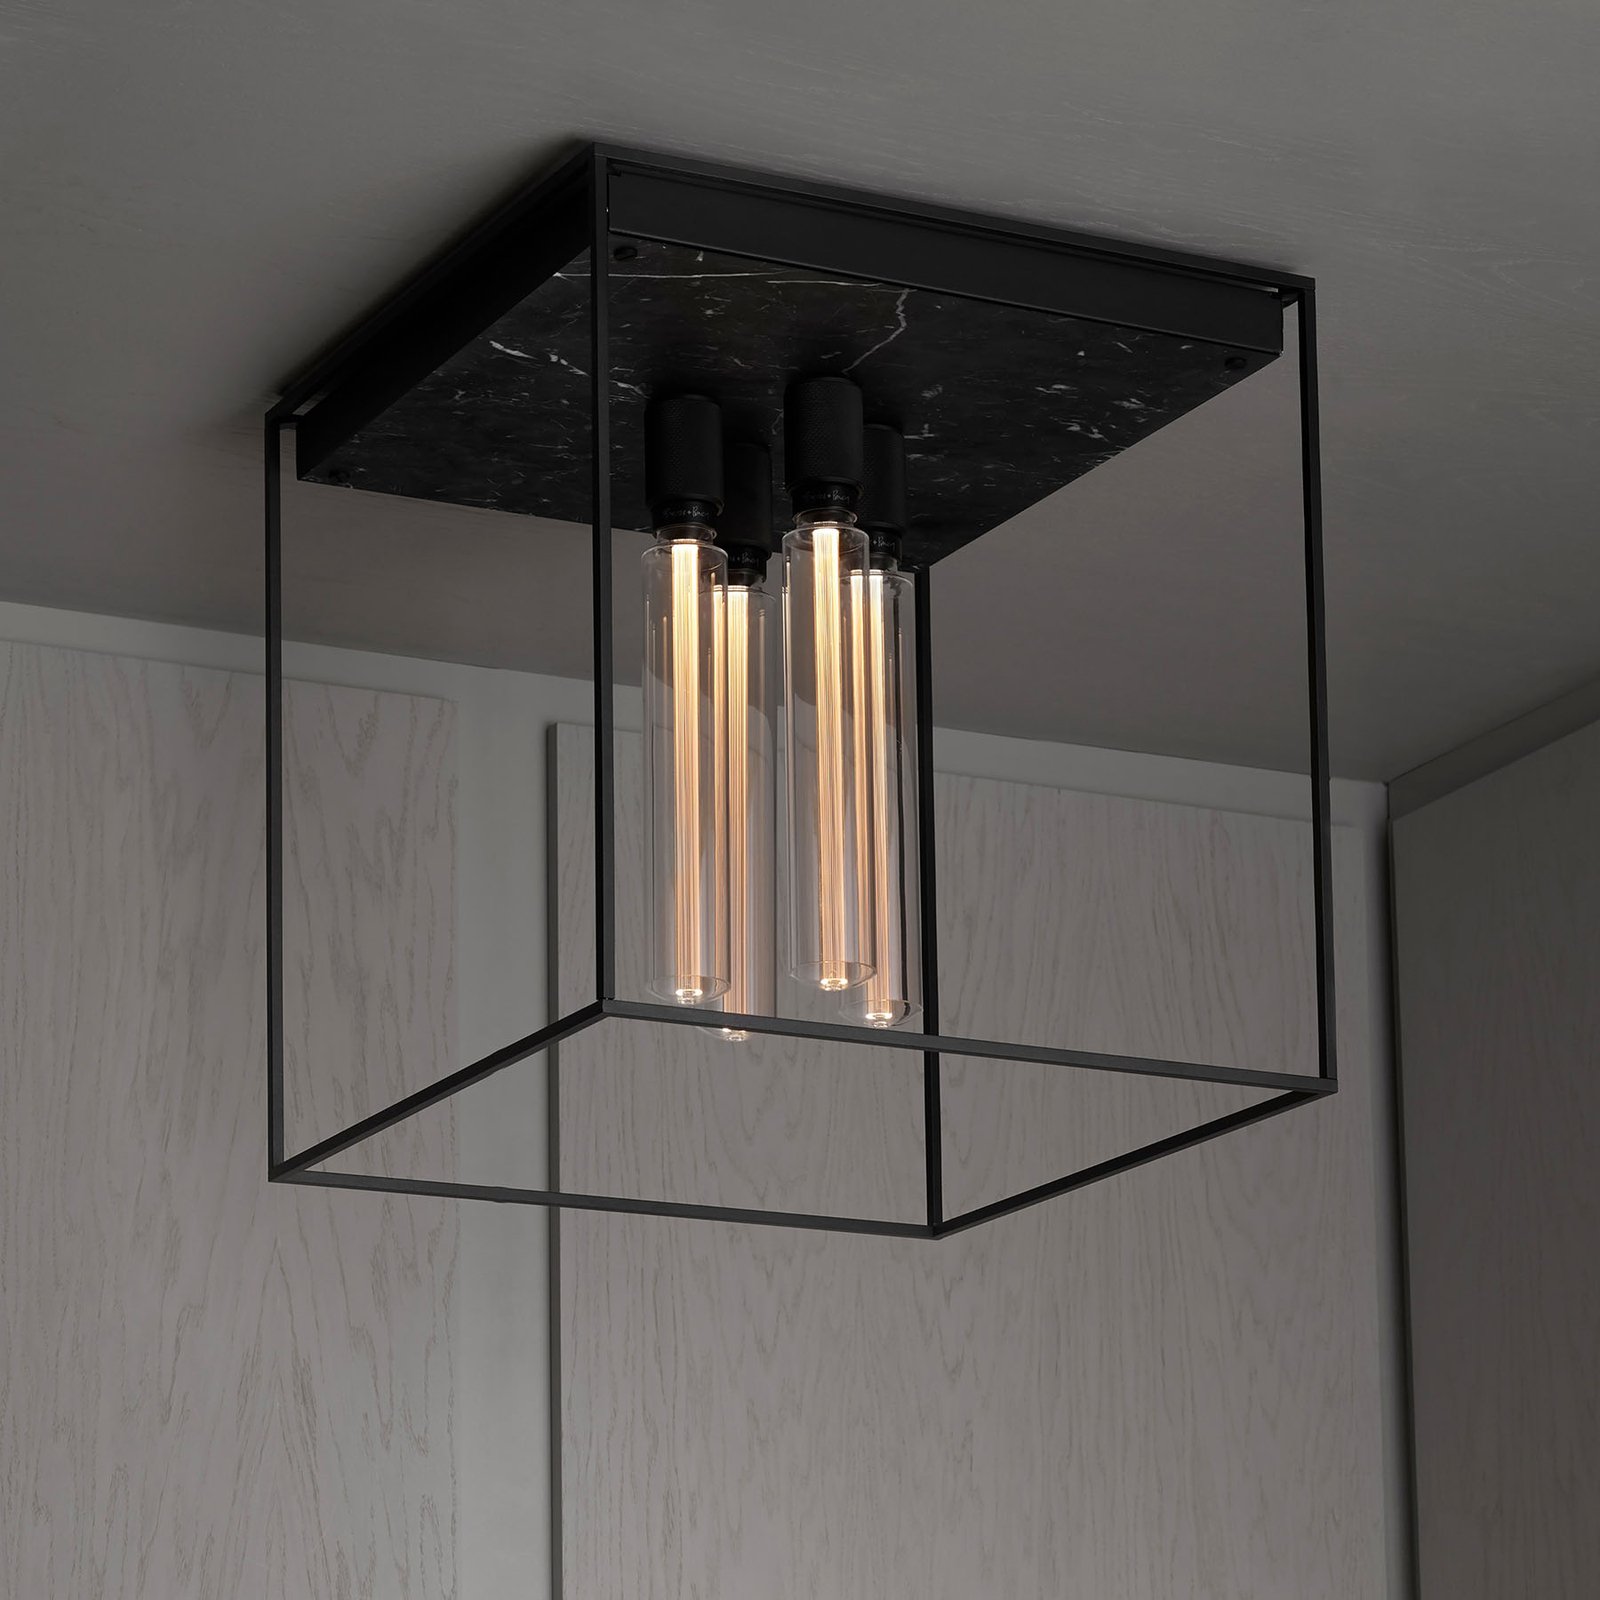 Buster + Punch Caged Ceiling 4.0 LED marmor black